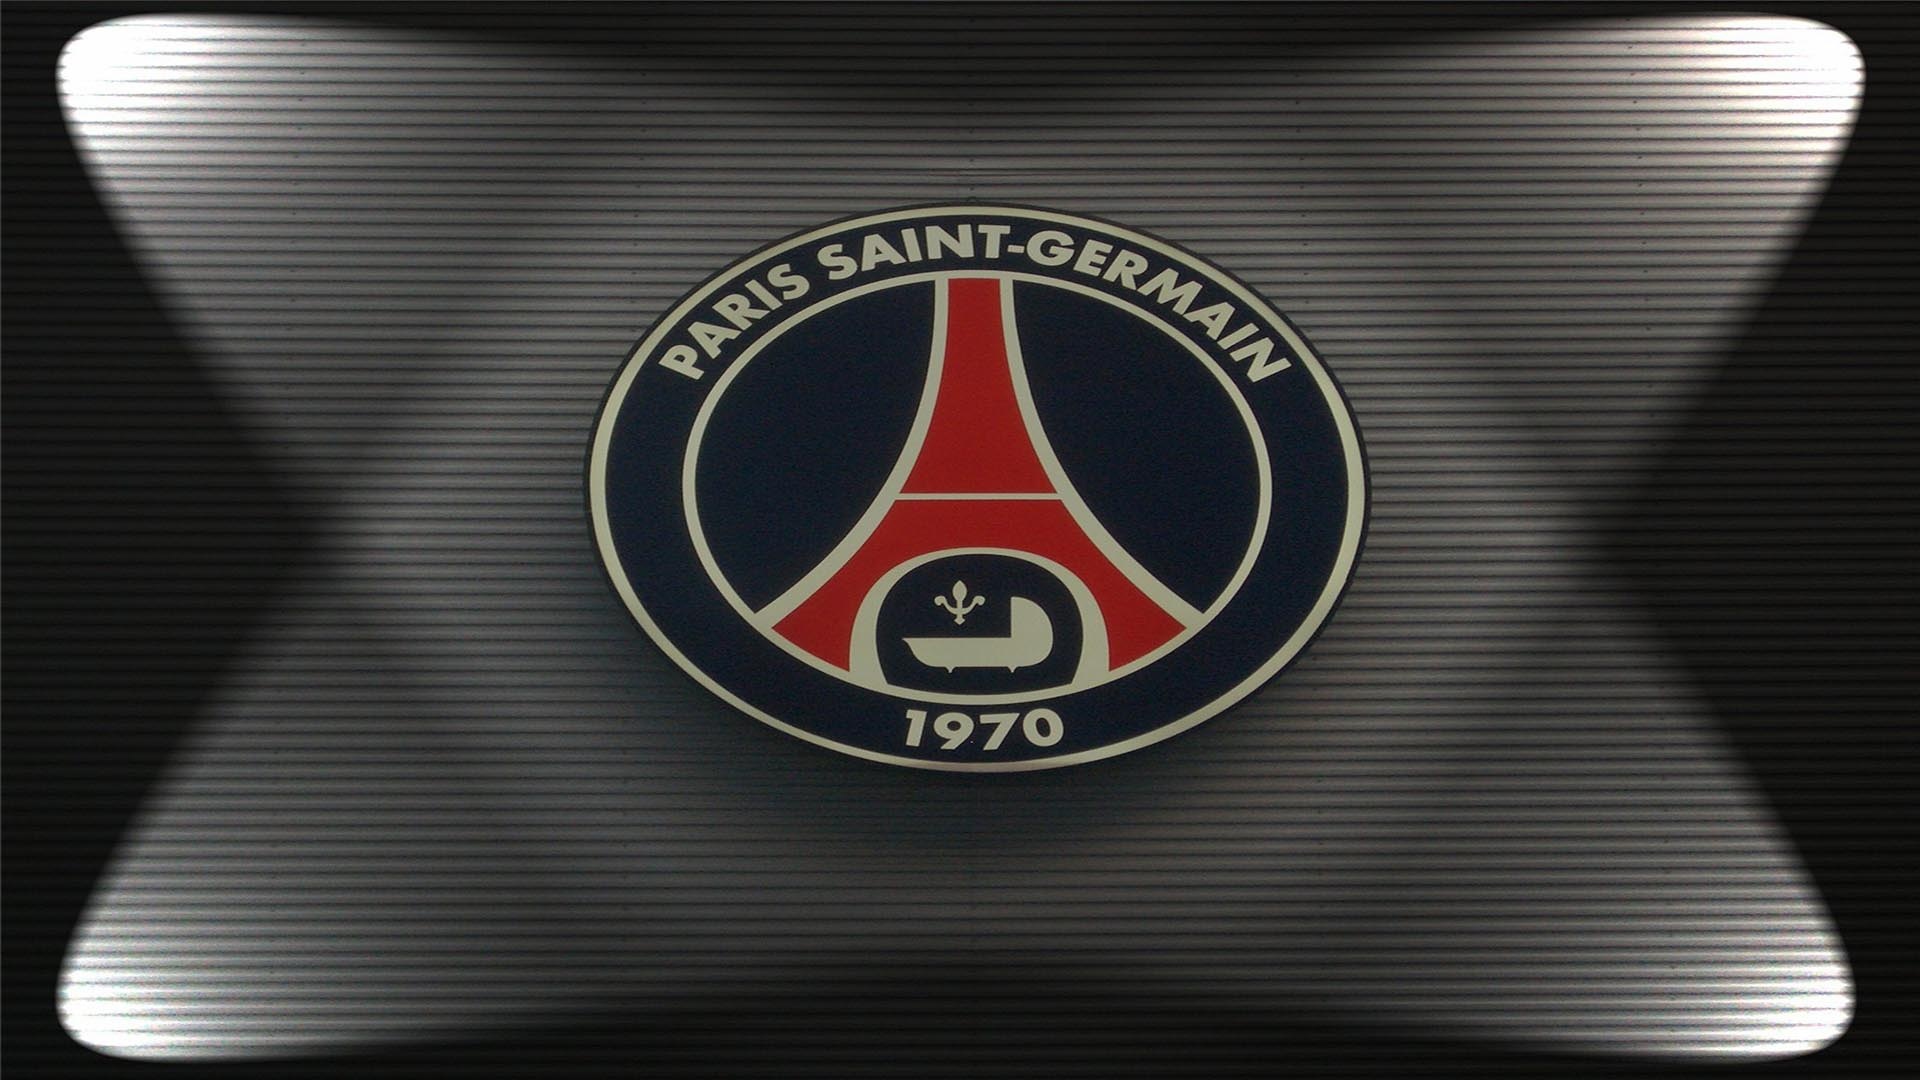 Paris Saint-Germain: One of the most widely supported teams in the world, France. 1920x1080 Full HD Background.